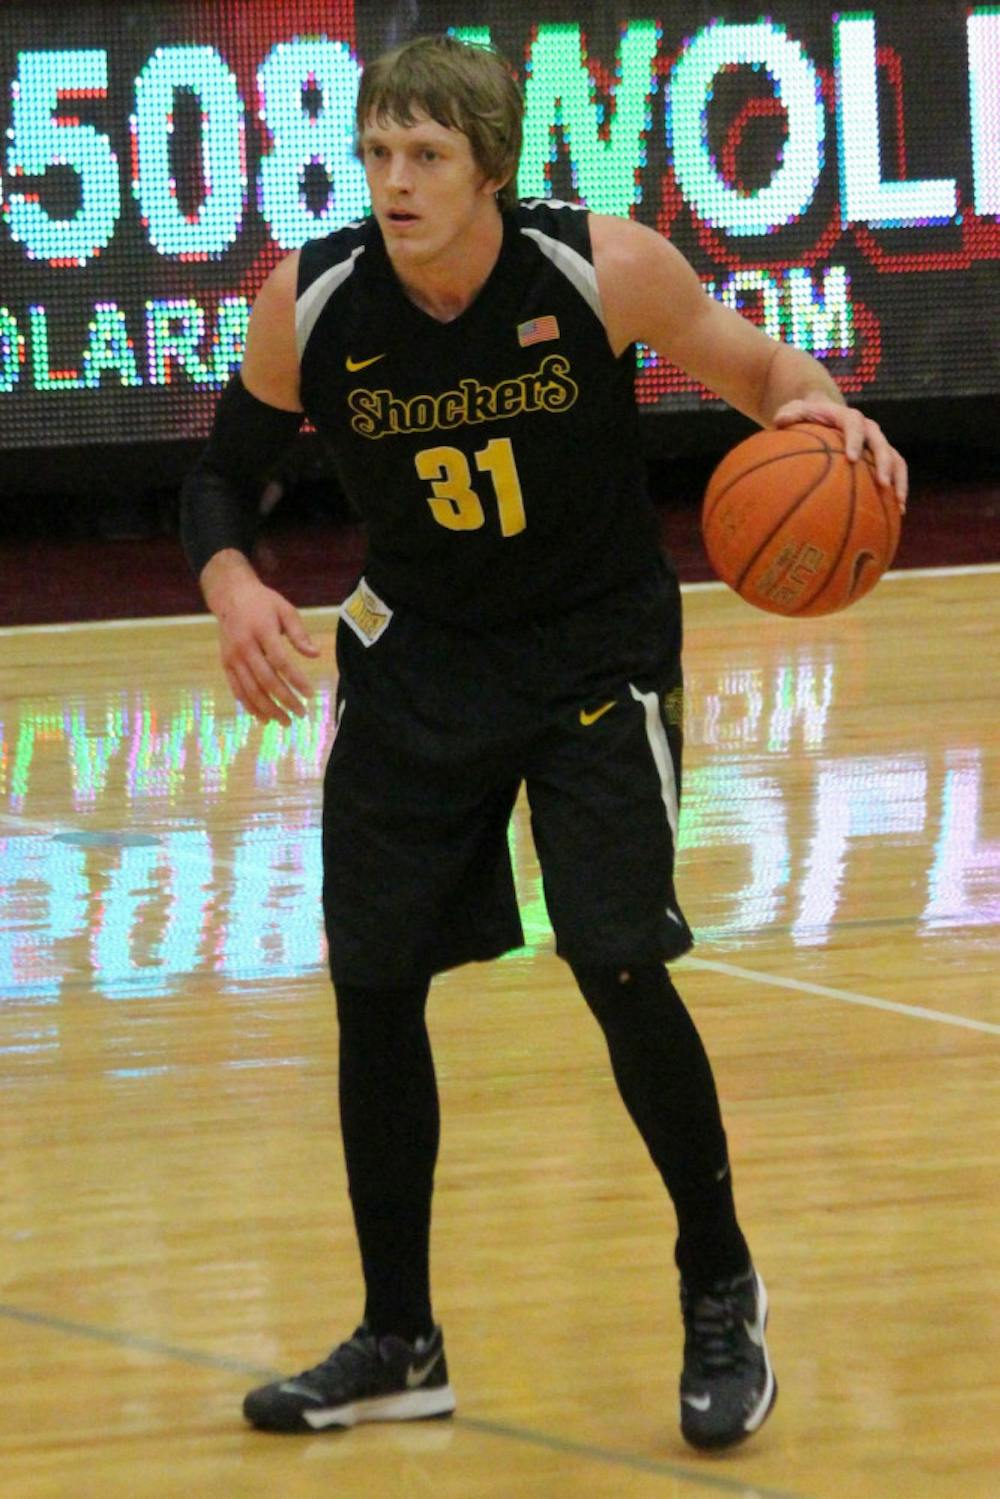 <p>Former Shocker guard Ron Baker sets up the offense. Baker played four seasons under Greg Marshall, including the 2013 Final Four season.&nbsp;</p>